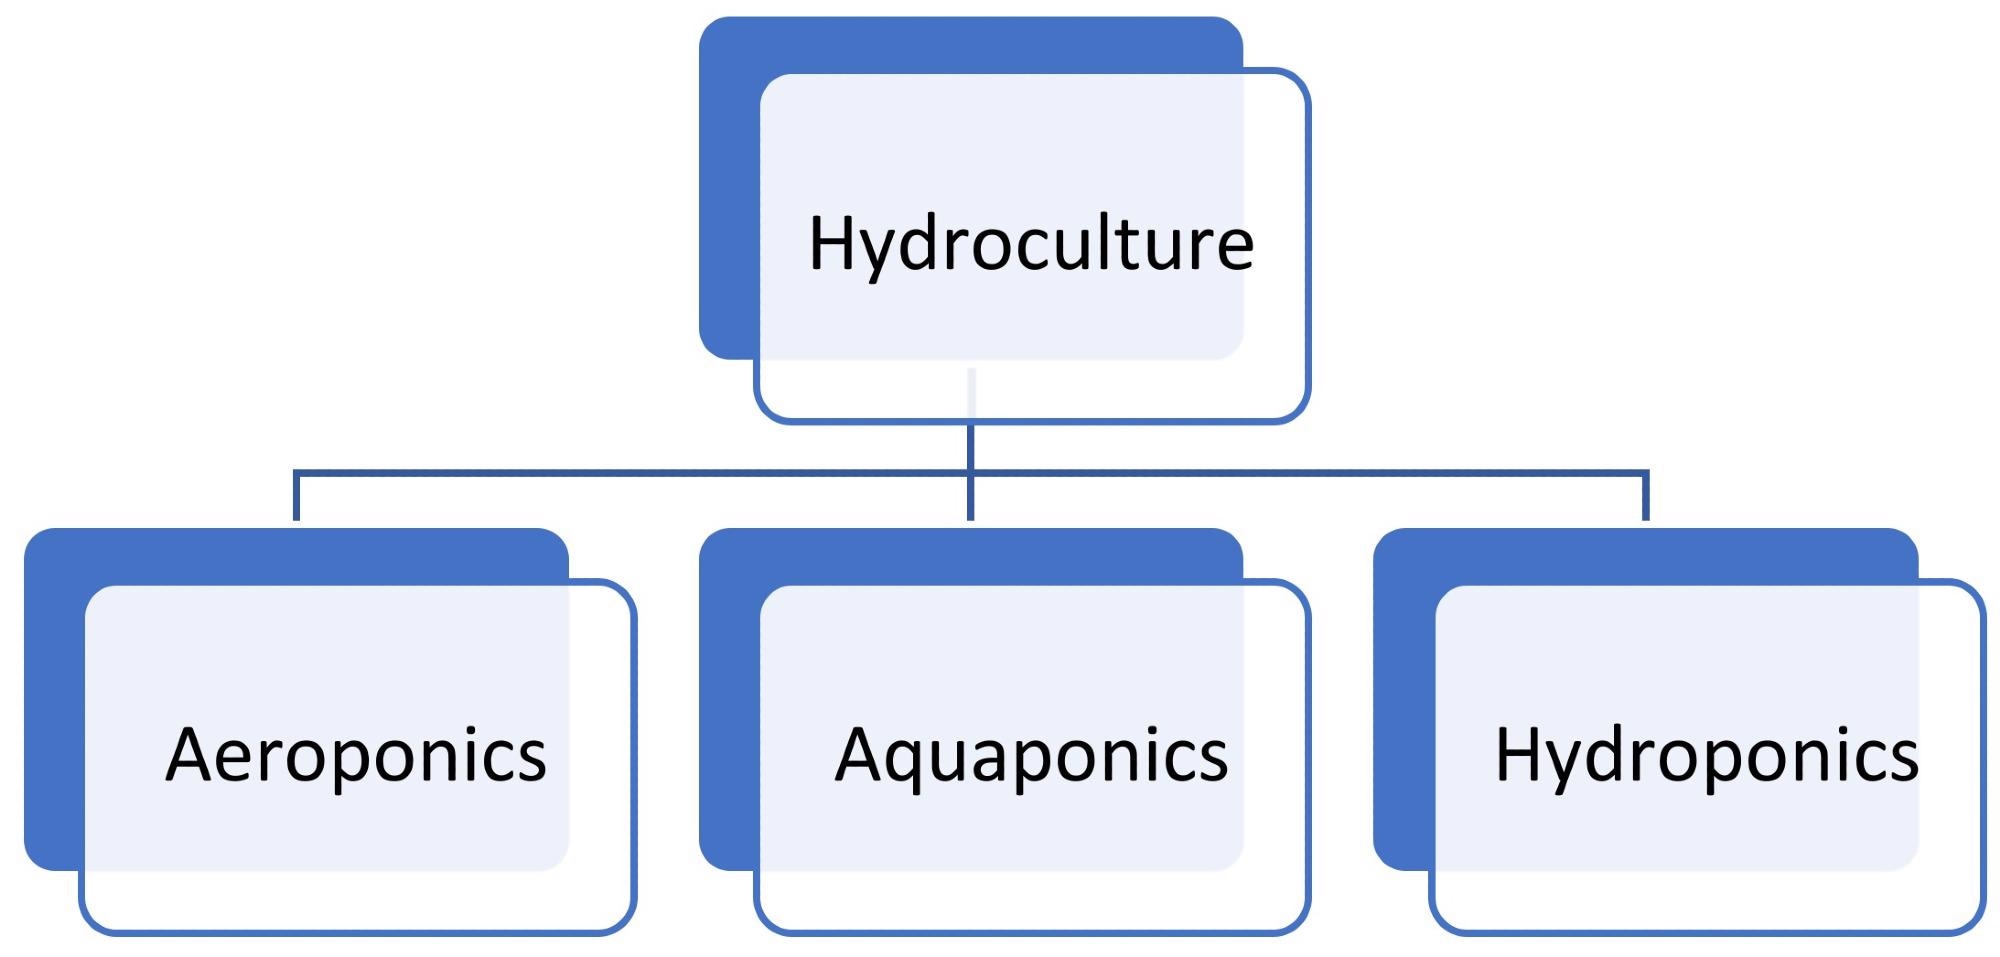 Different Hydroculture Systems.